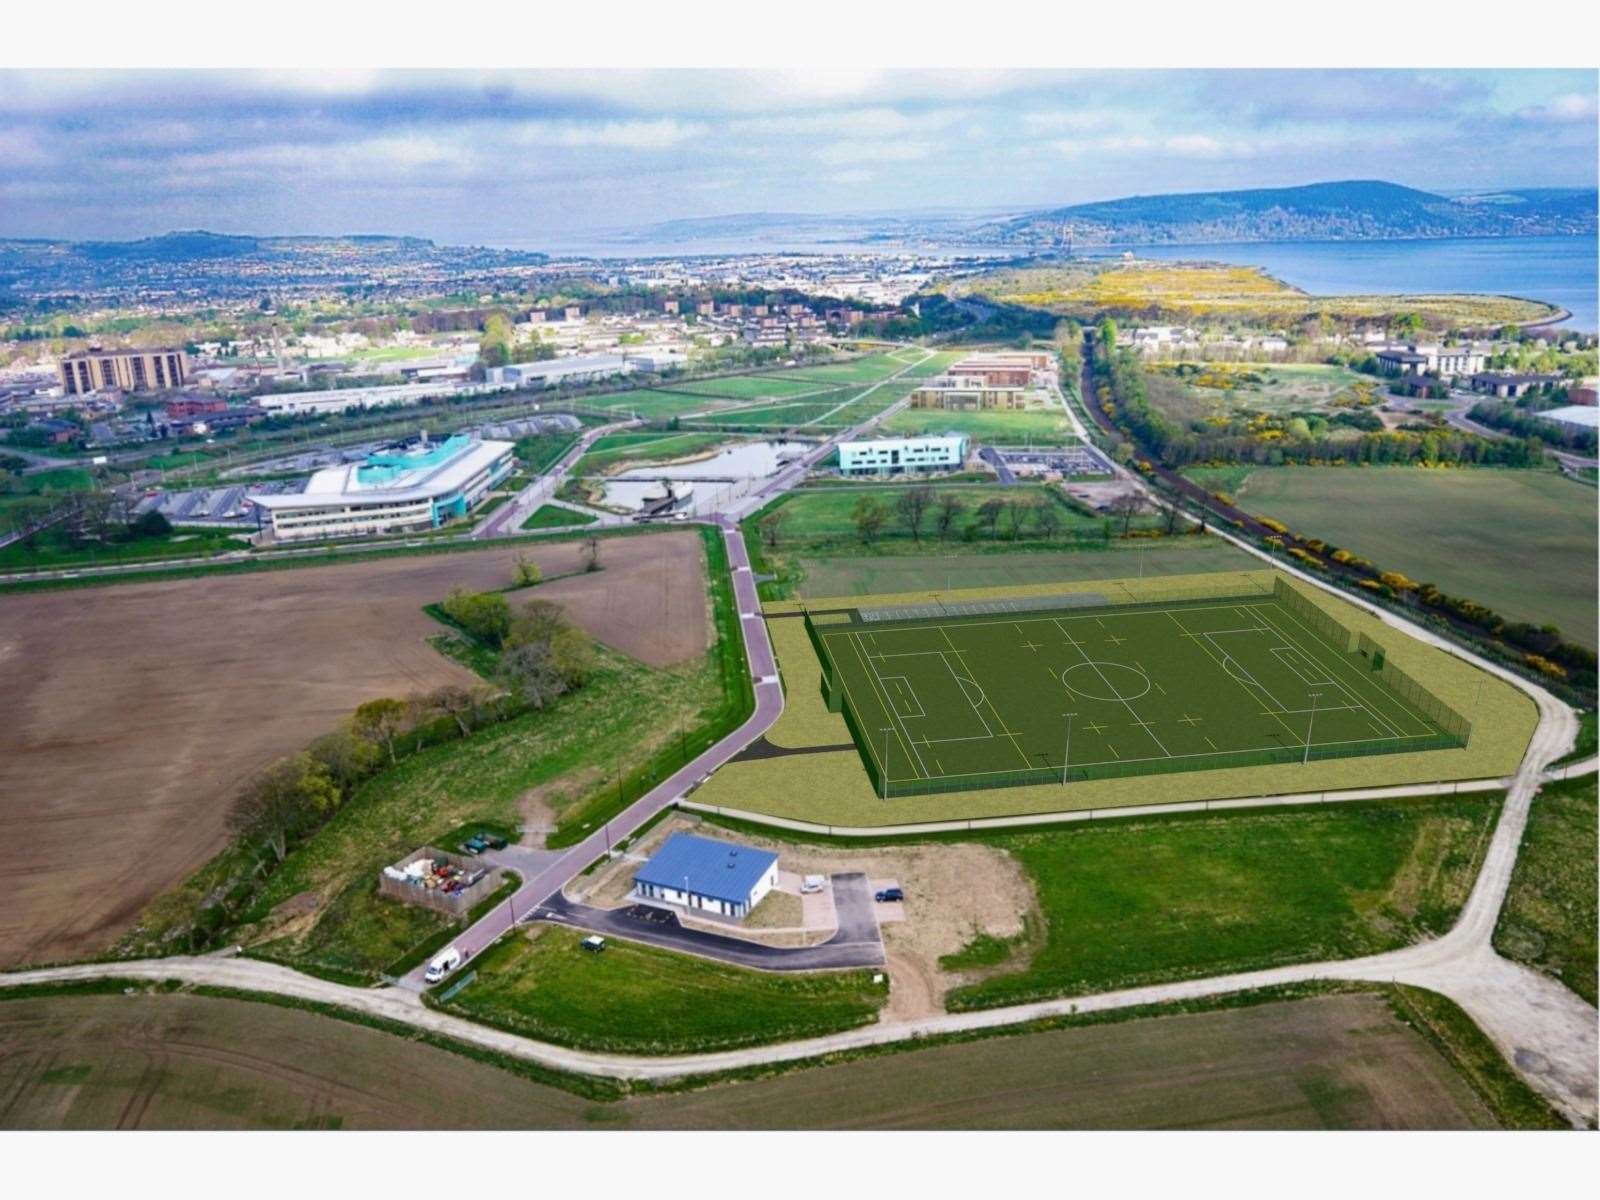 An aerial visual of the proposed sports pitch at UHI's Inverness campus.